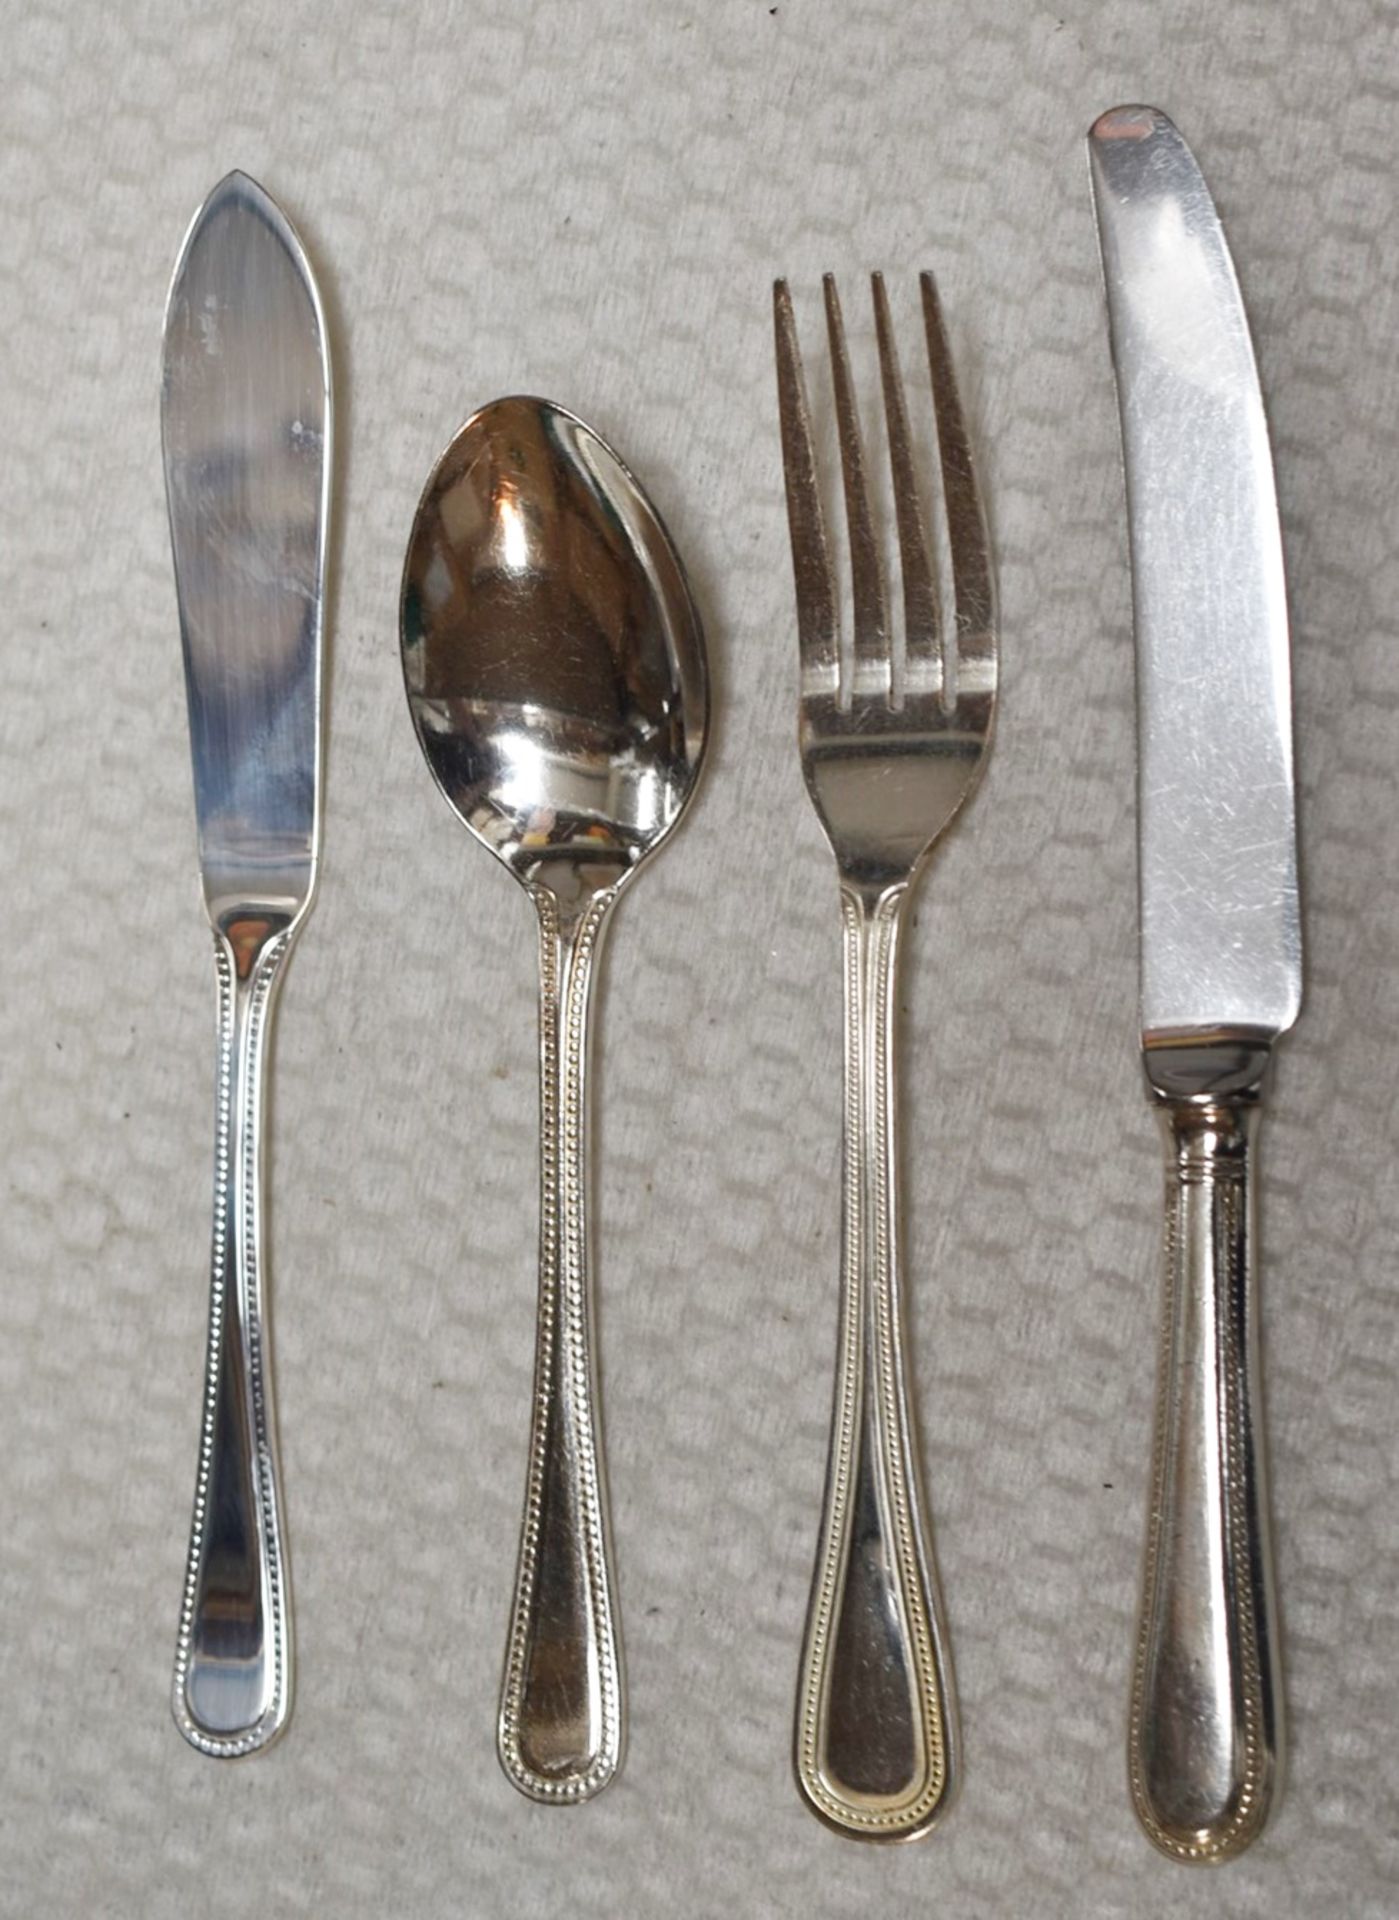 40 x Pieces of Silver Plated Stainless Steel Decorative Cutlery - Includes Knives, Forks, Spoons and - Image 10 of 11